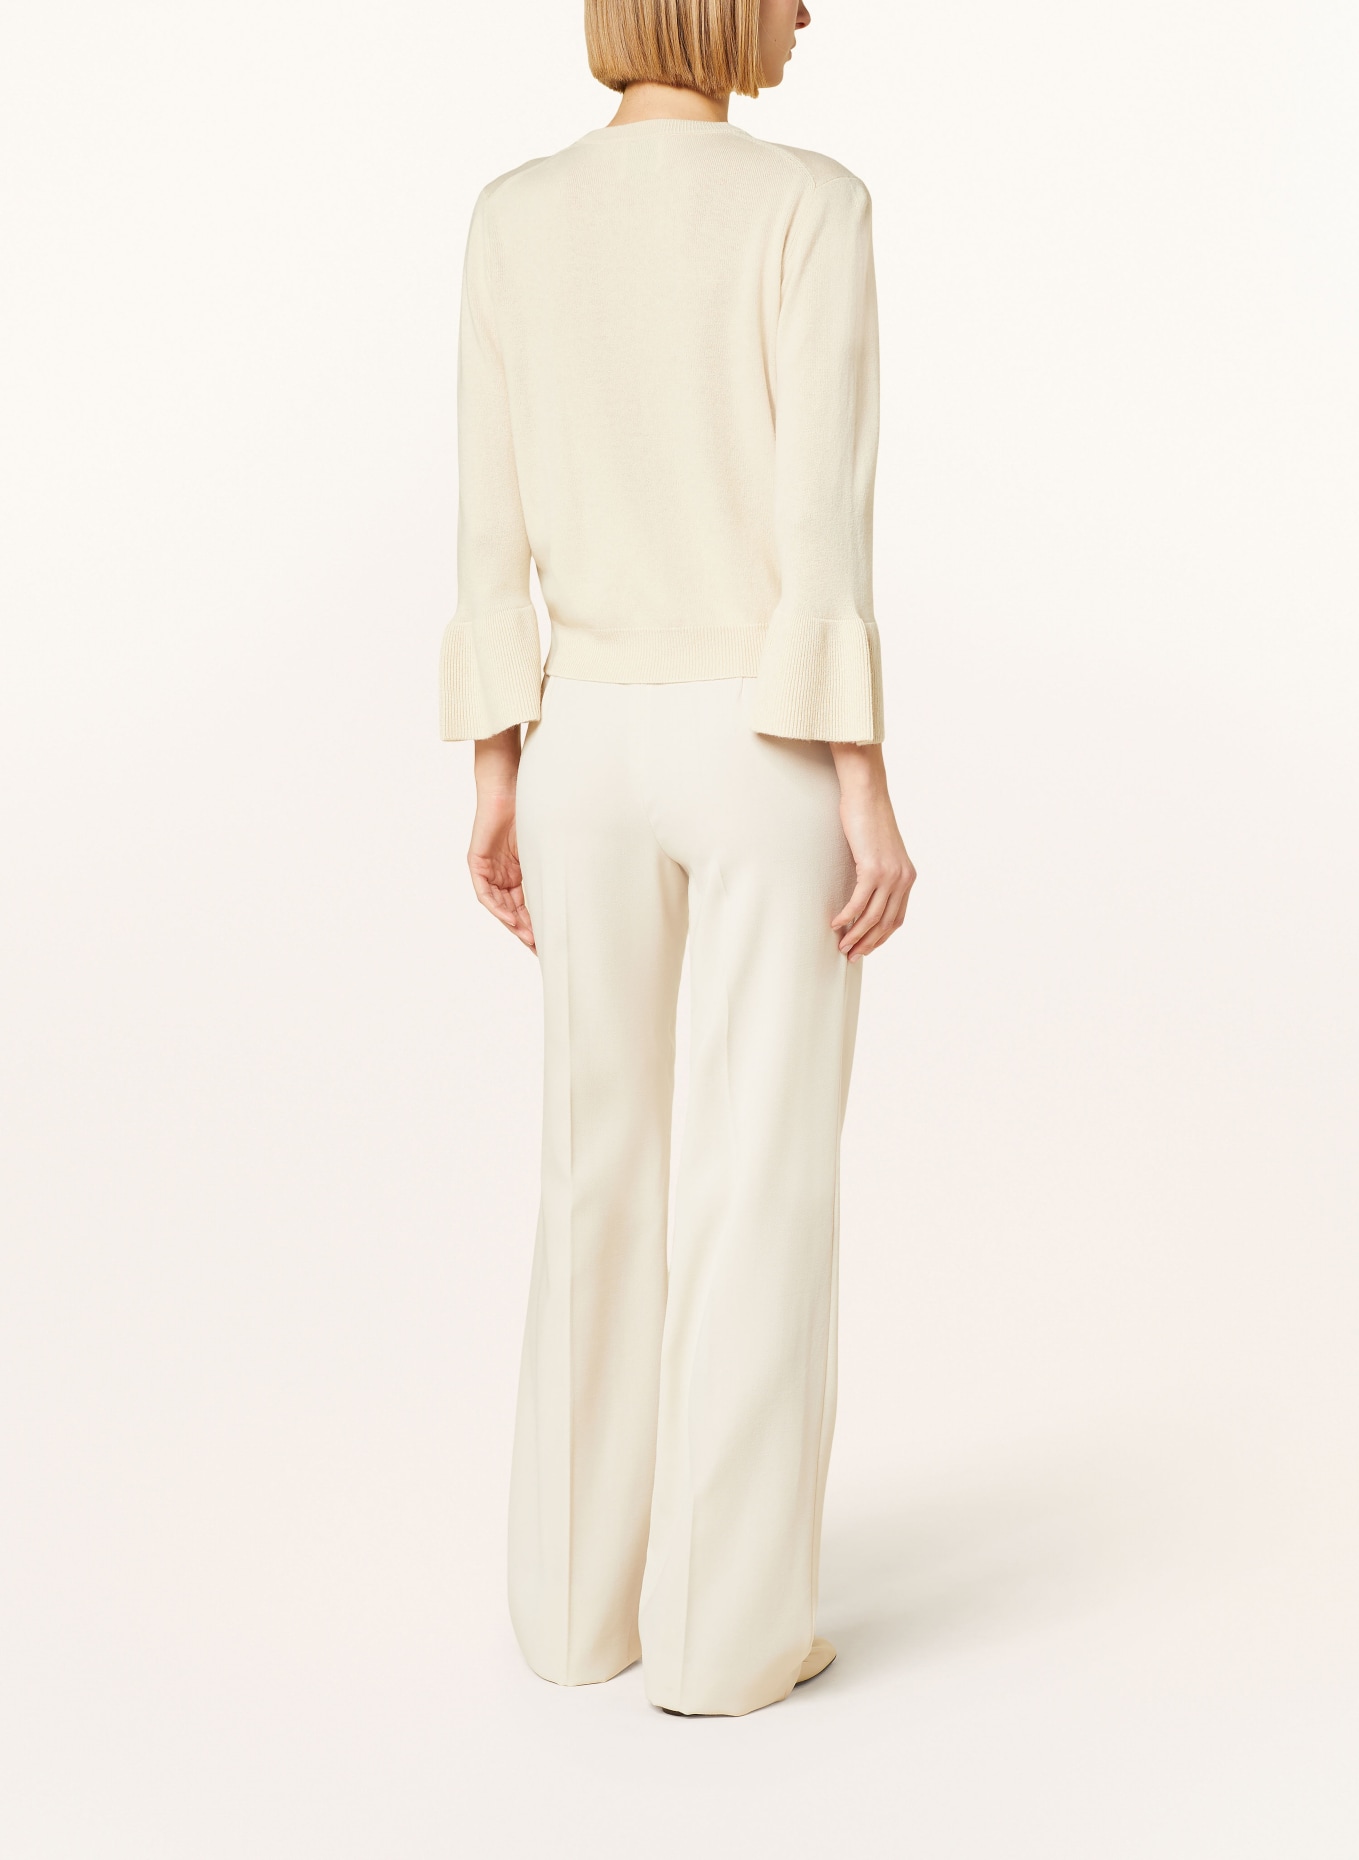 ALLUDE Sweater with cashmere, Color: CREAM (Image 3)